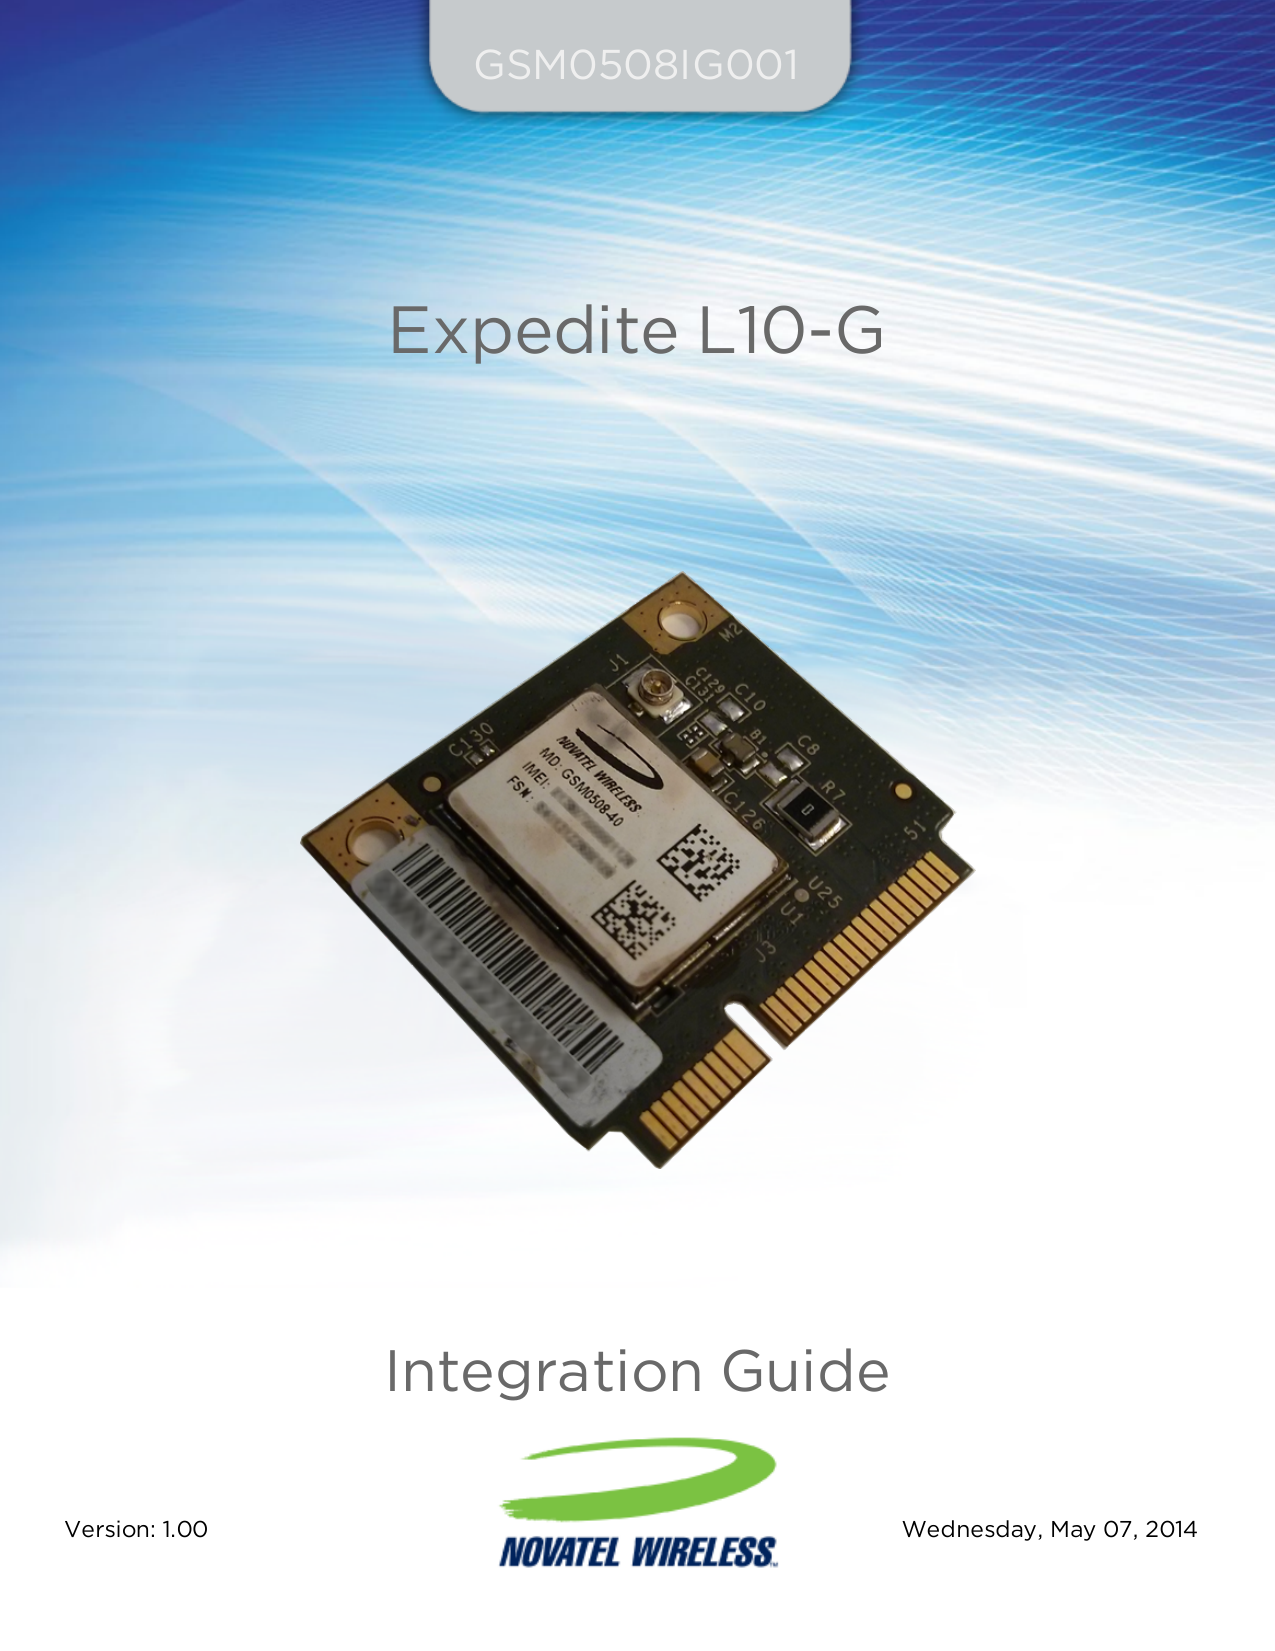 GSM0508IG001Expedite L10-GIntegration GuideVersion: 1.00 Wednesday, May 07, 2014